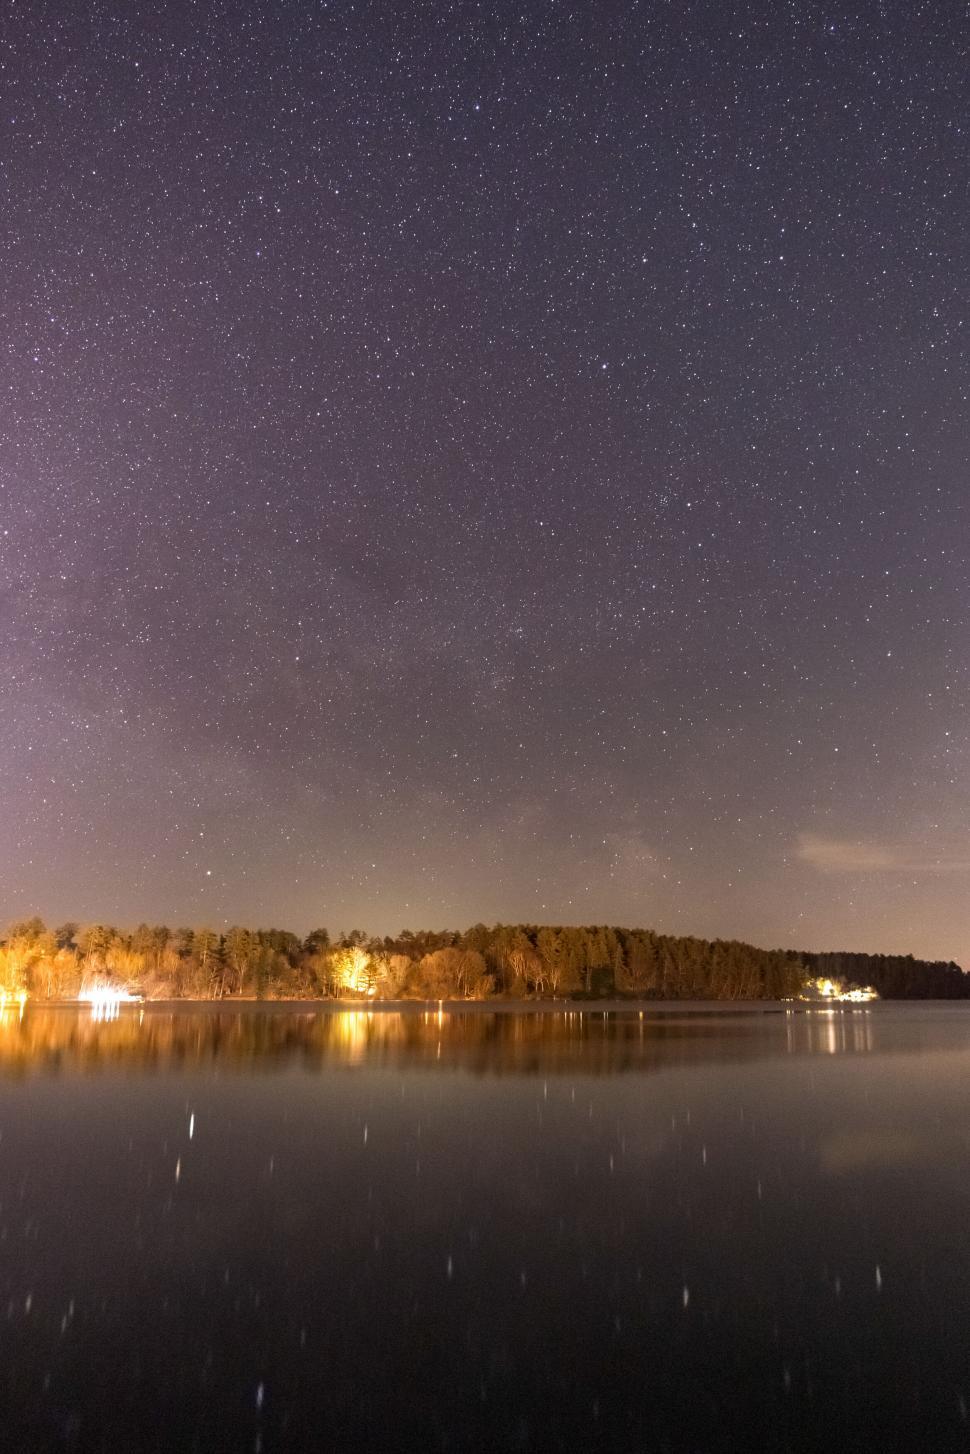 Free Image of Starry night sky reflecting on a calm lake 